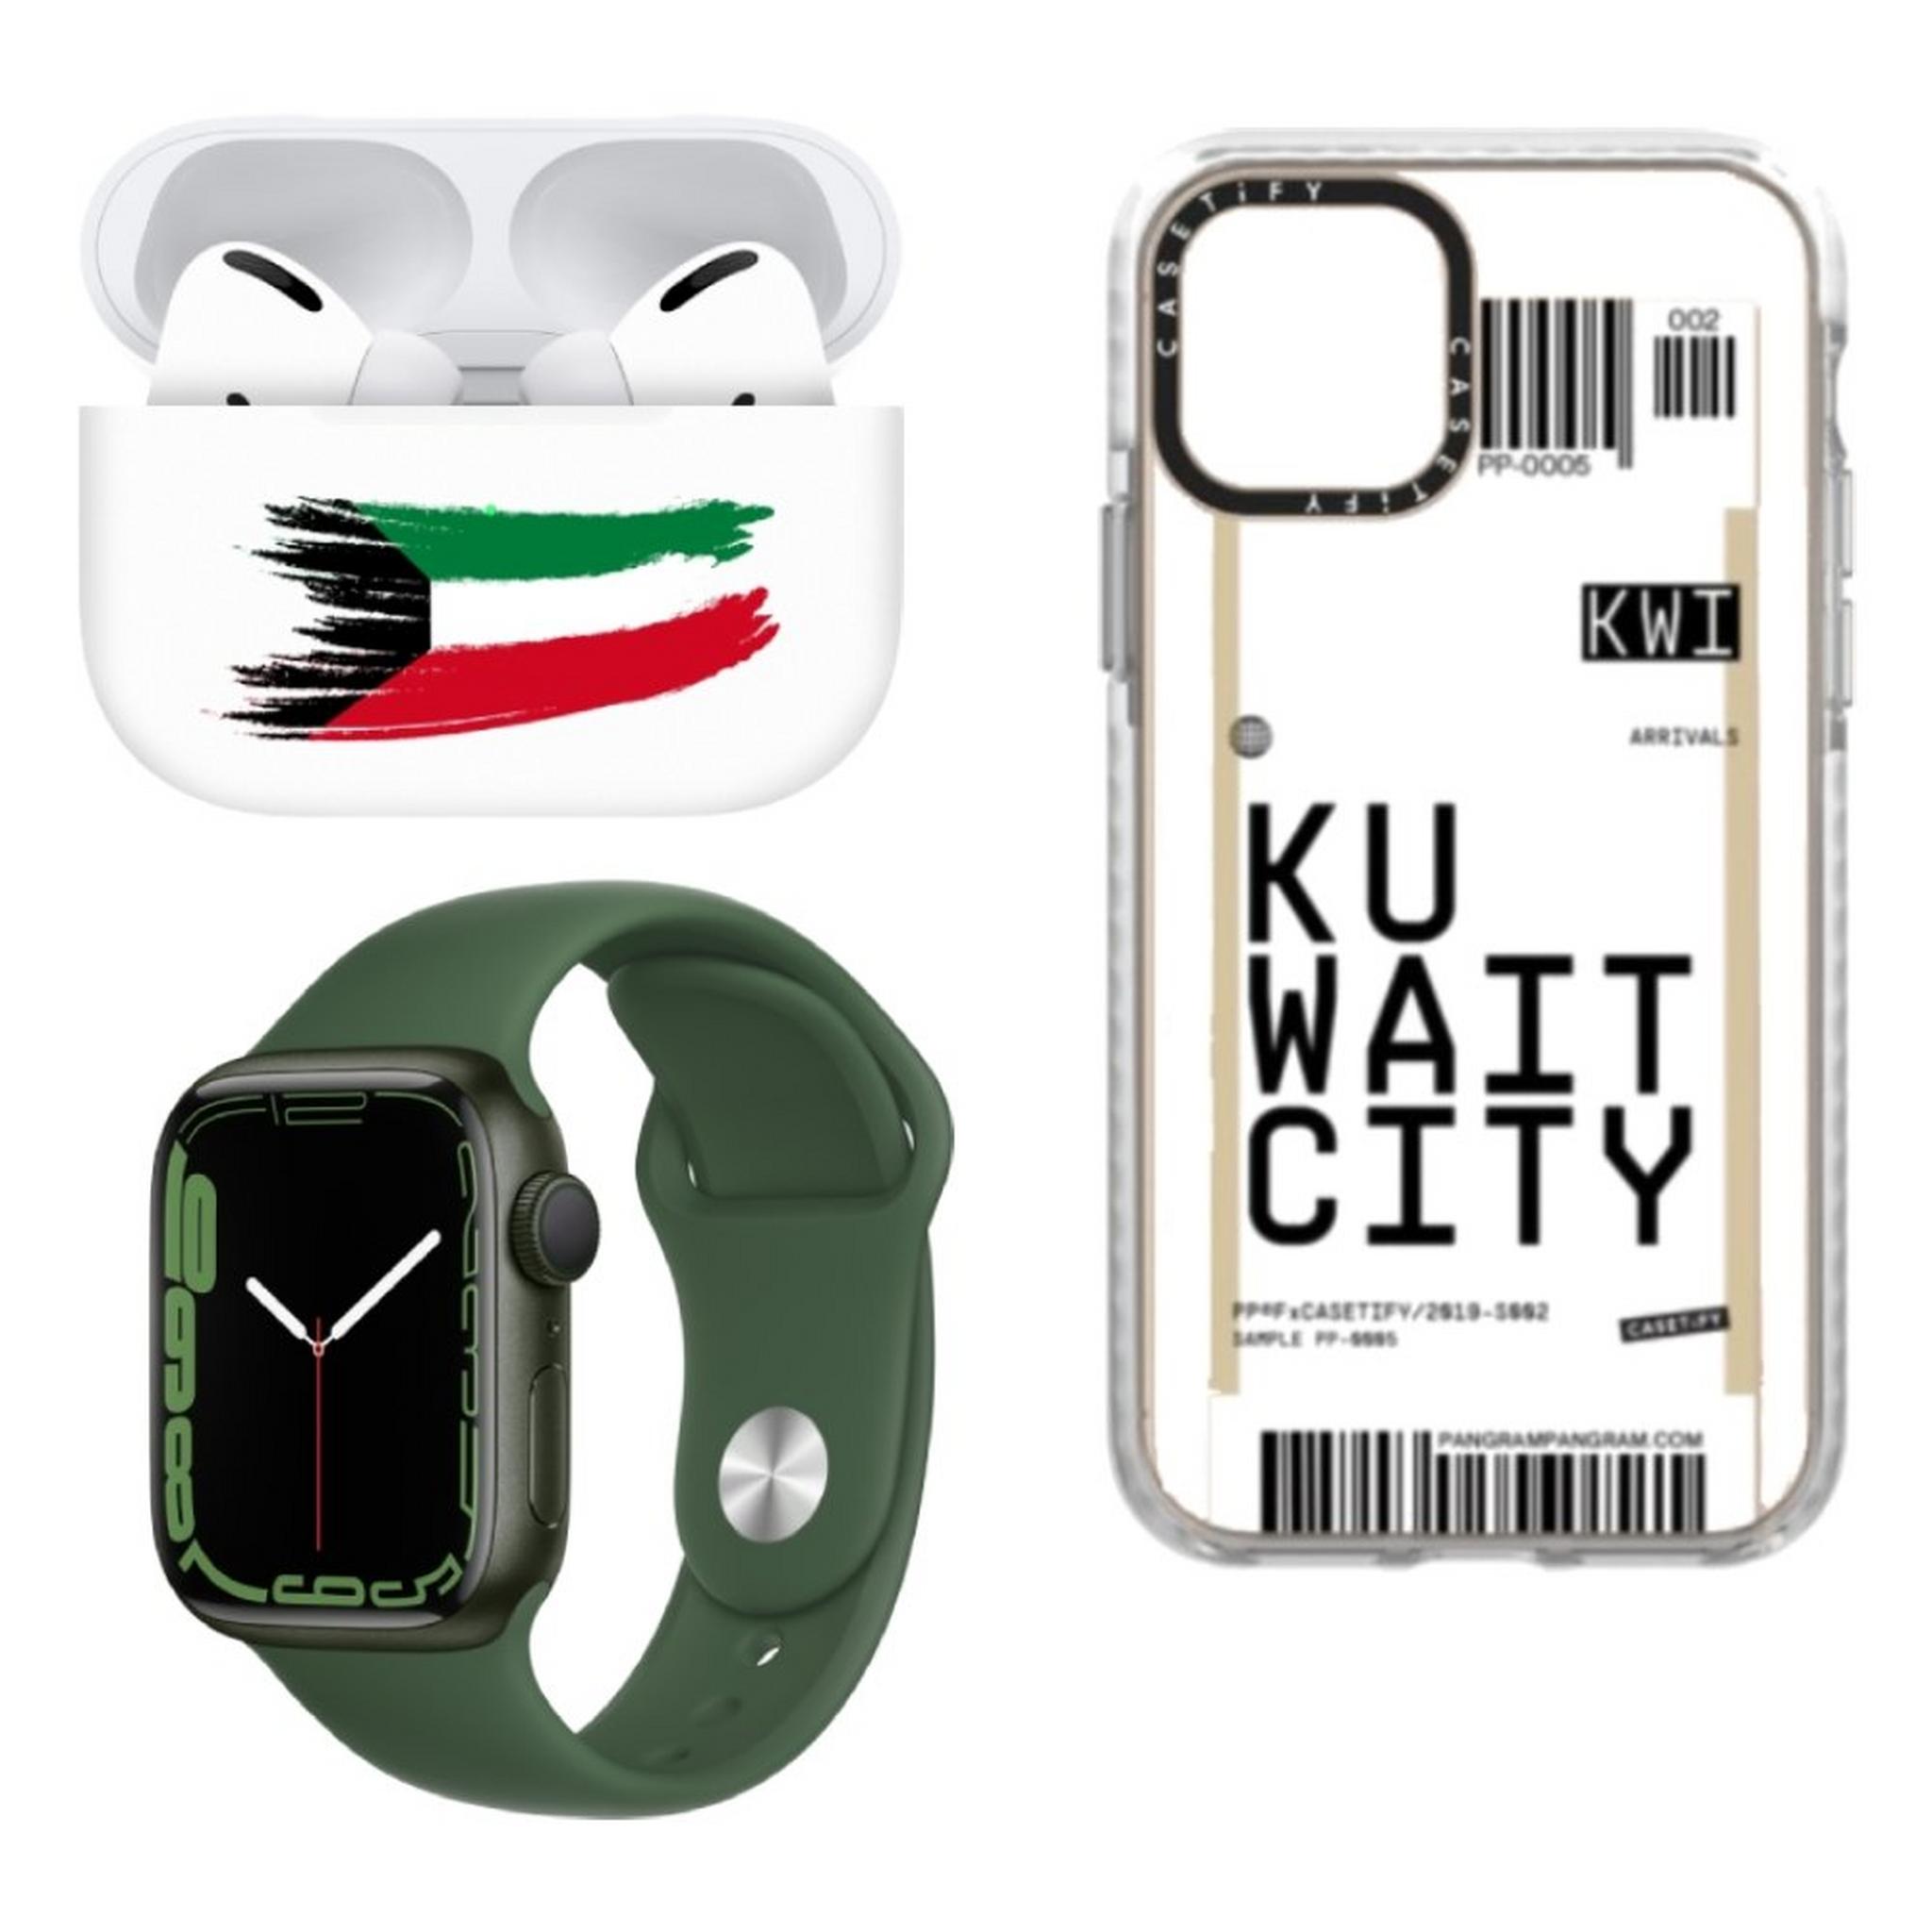 Switch Paint Apple Airpods Pro Q8 Flag - White Buds + Casetify Impact Case for iPhone 13 Pro Max - Kuwait City + Apple Watch Series 7 41mm - Clover